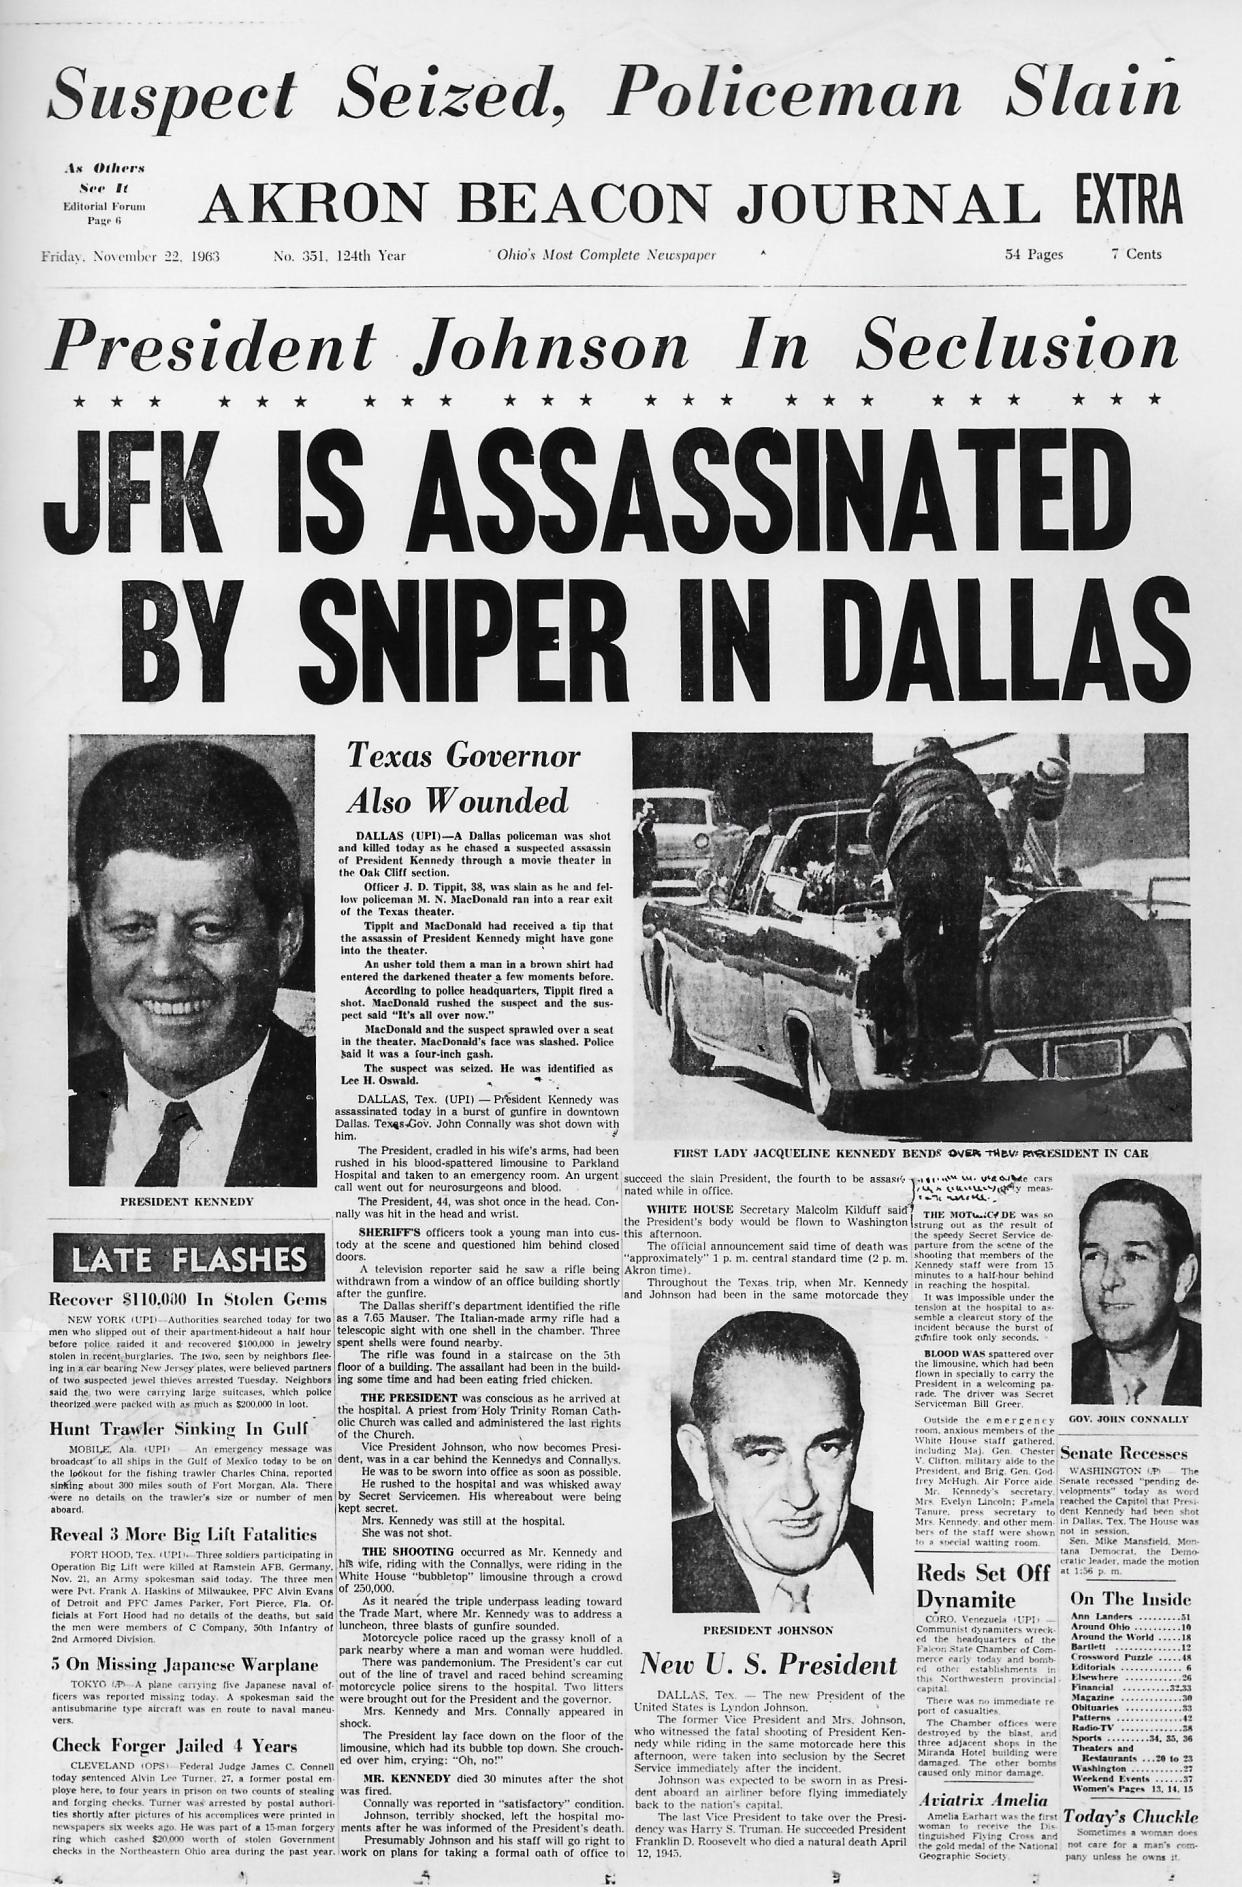 The Akron Beacon Journal reports the assassination of President John F. Kennedy on Nov. 22, 1963.